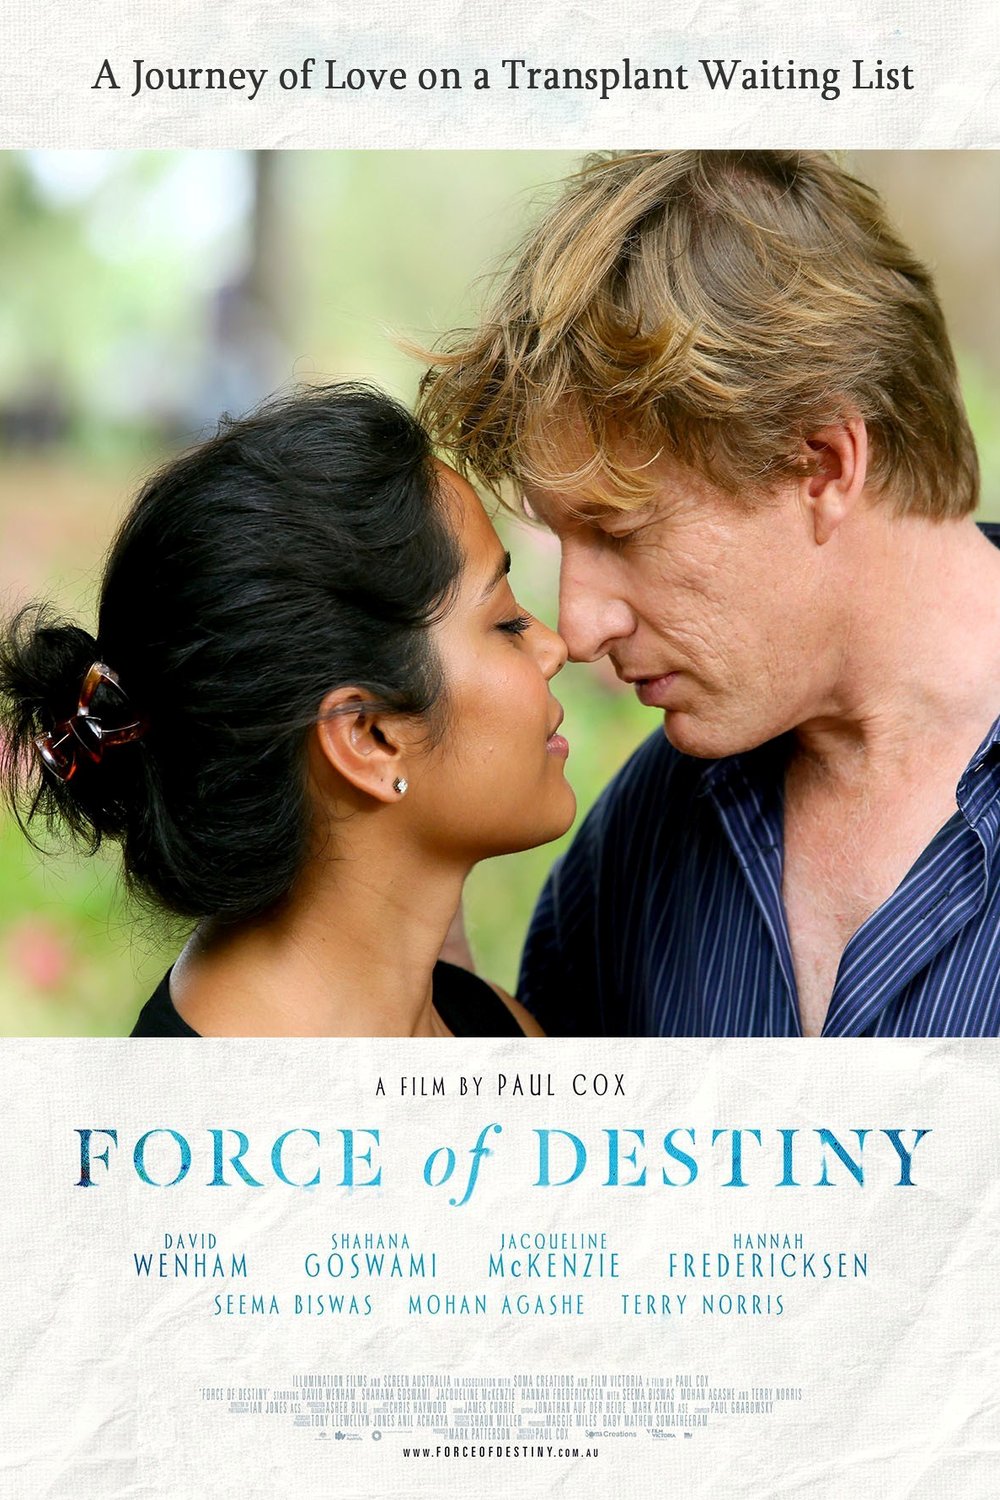 Poster of the movie Force of Destiny